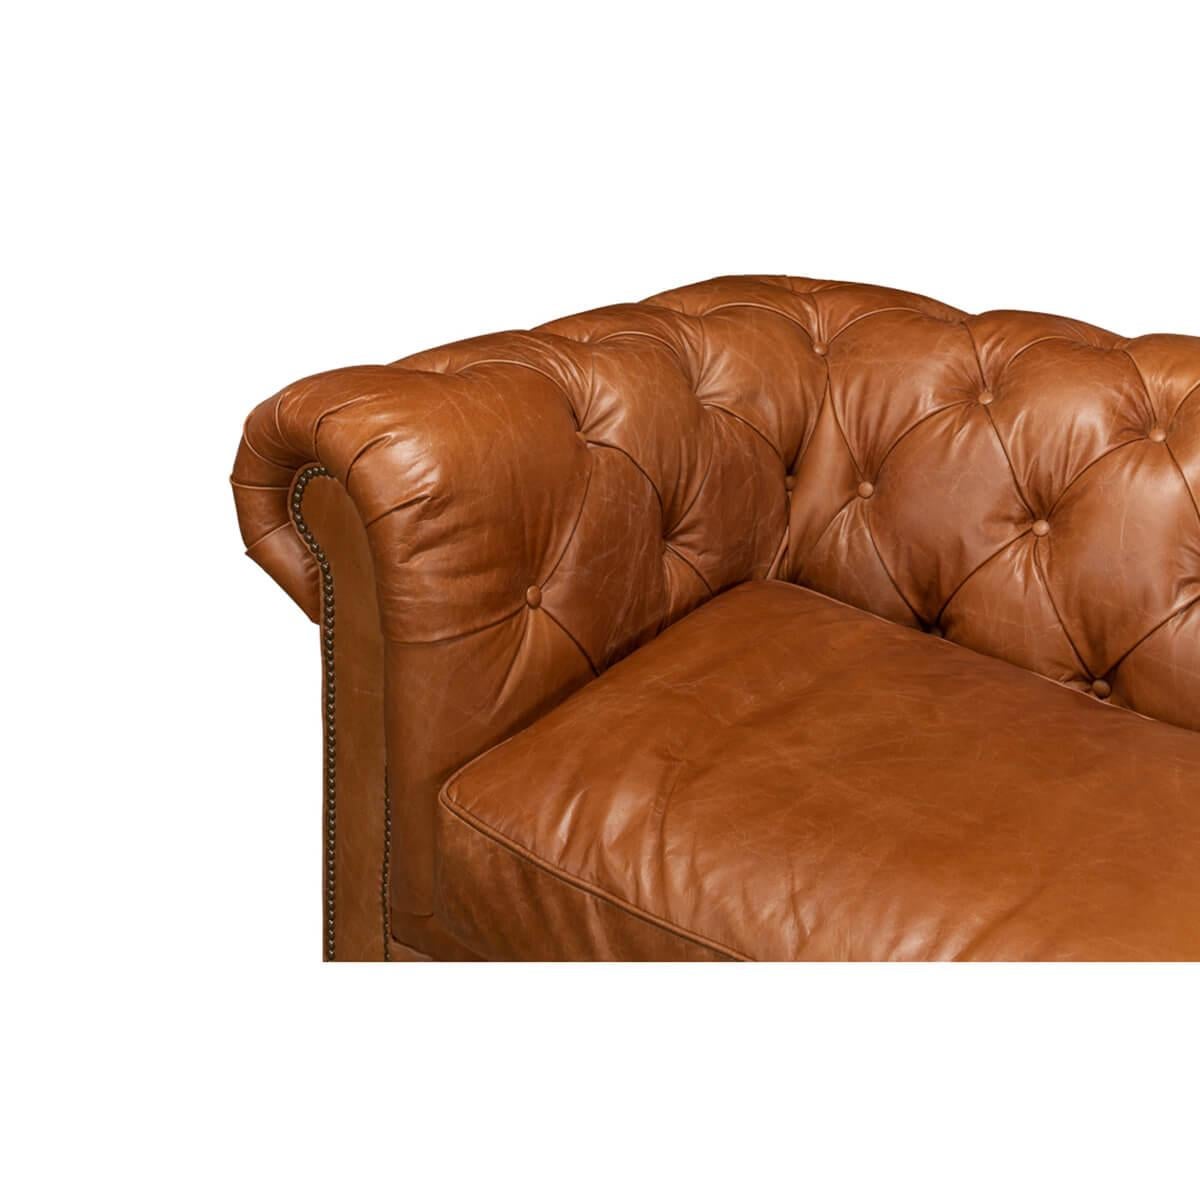 Asian Vintage Style Classic Chesterfield Sofa - Vienna Brown Leather For Sale